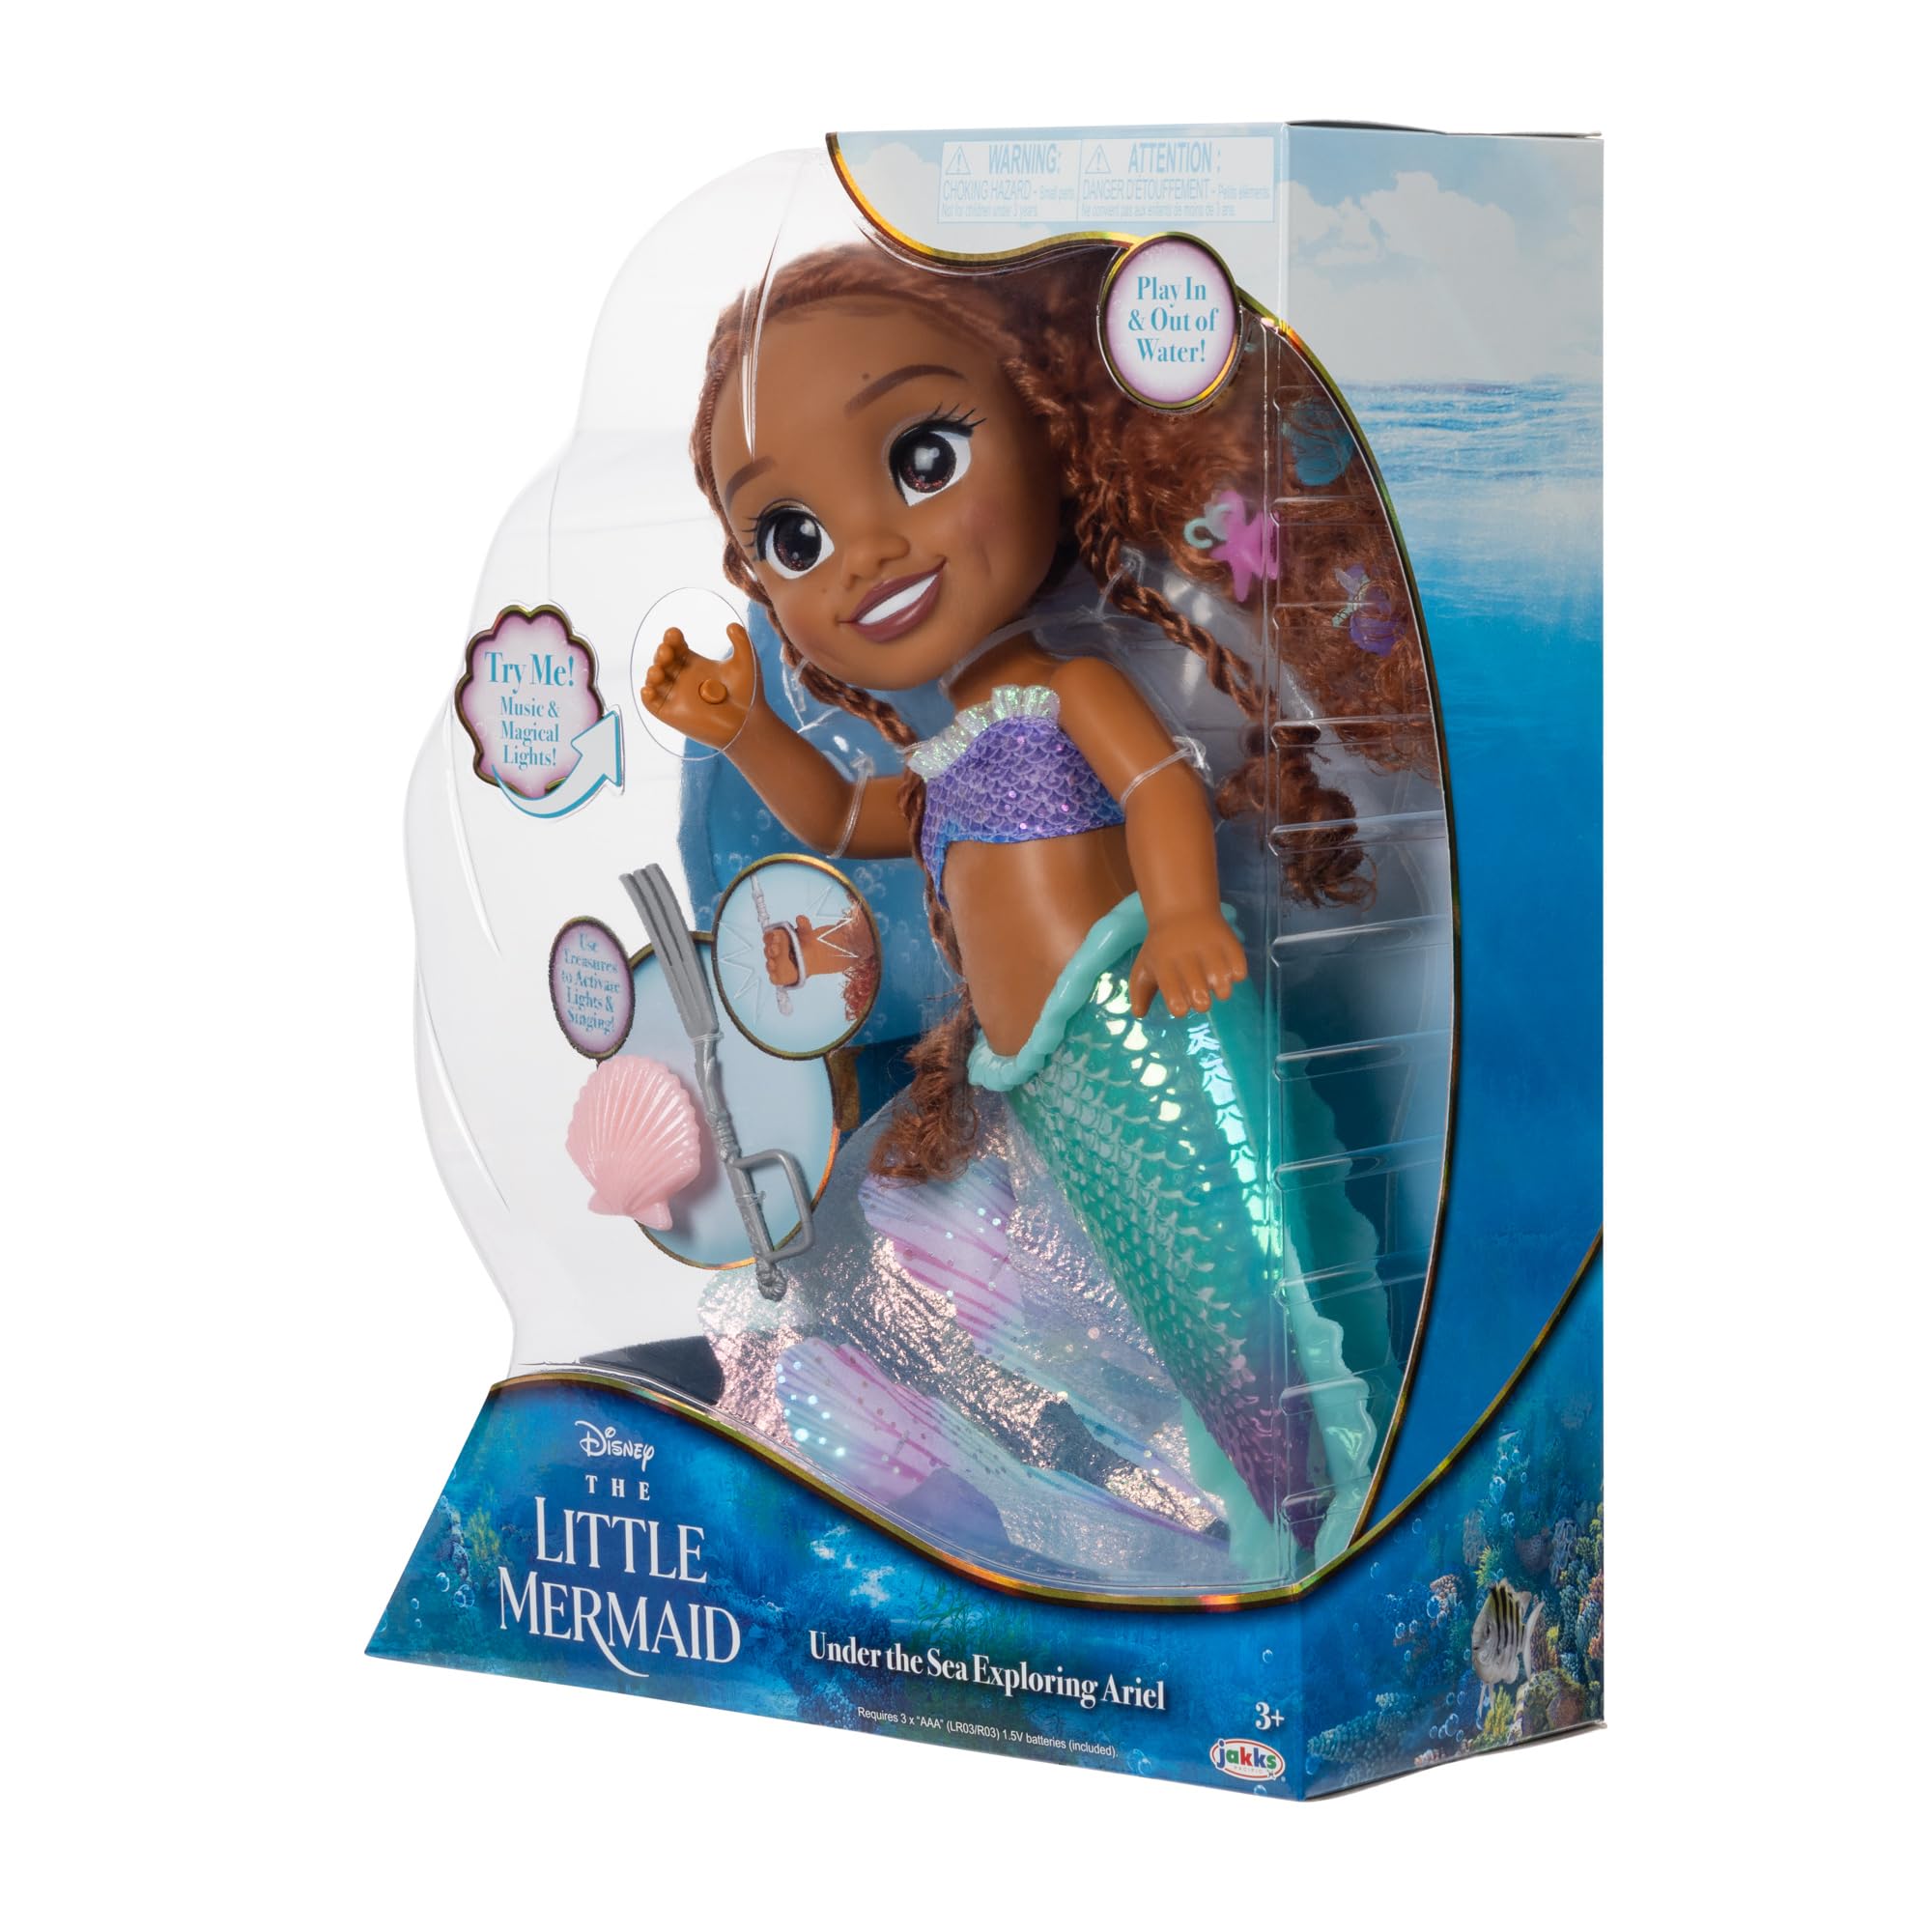 Disney The Little Mermaid Ariel Doll with Hair Charms! Feature Singing & Talking Doll, Accessories Activate Music & Magical Lights - Play in & Out of Water!